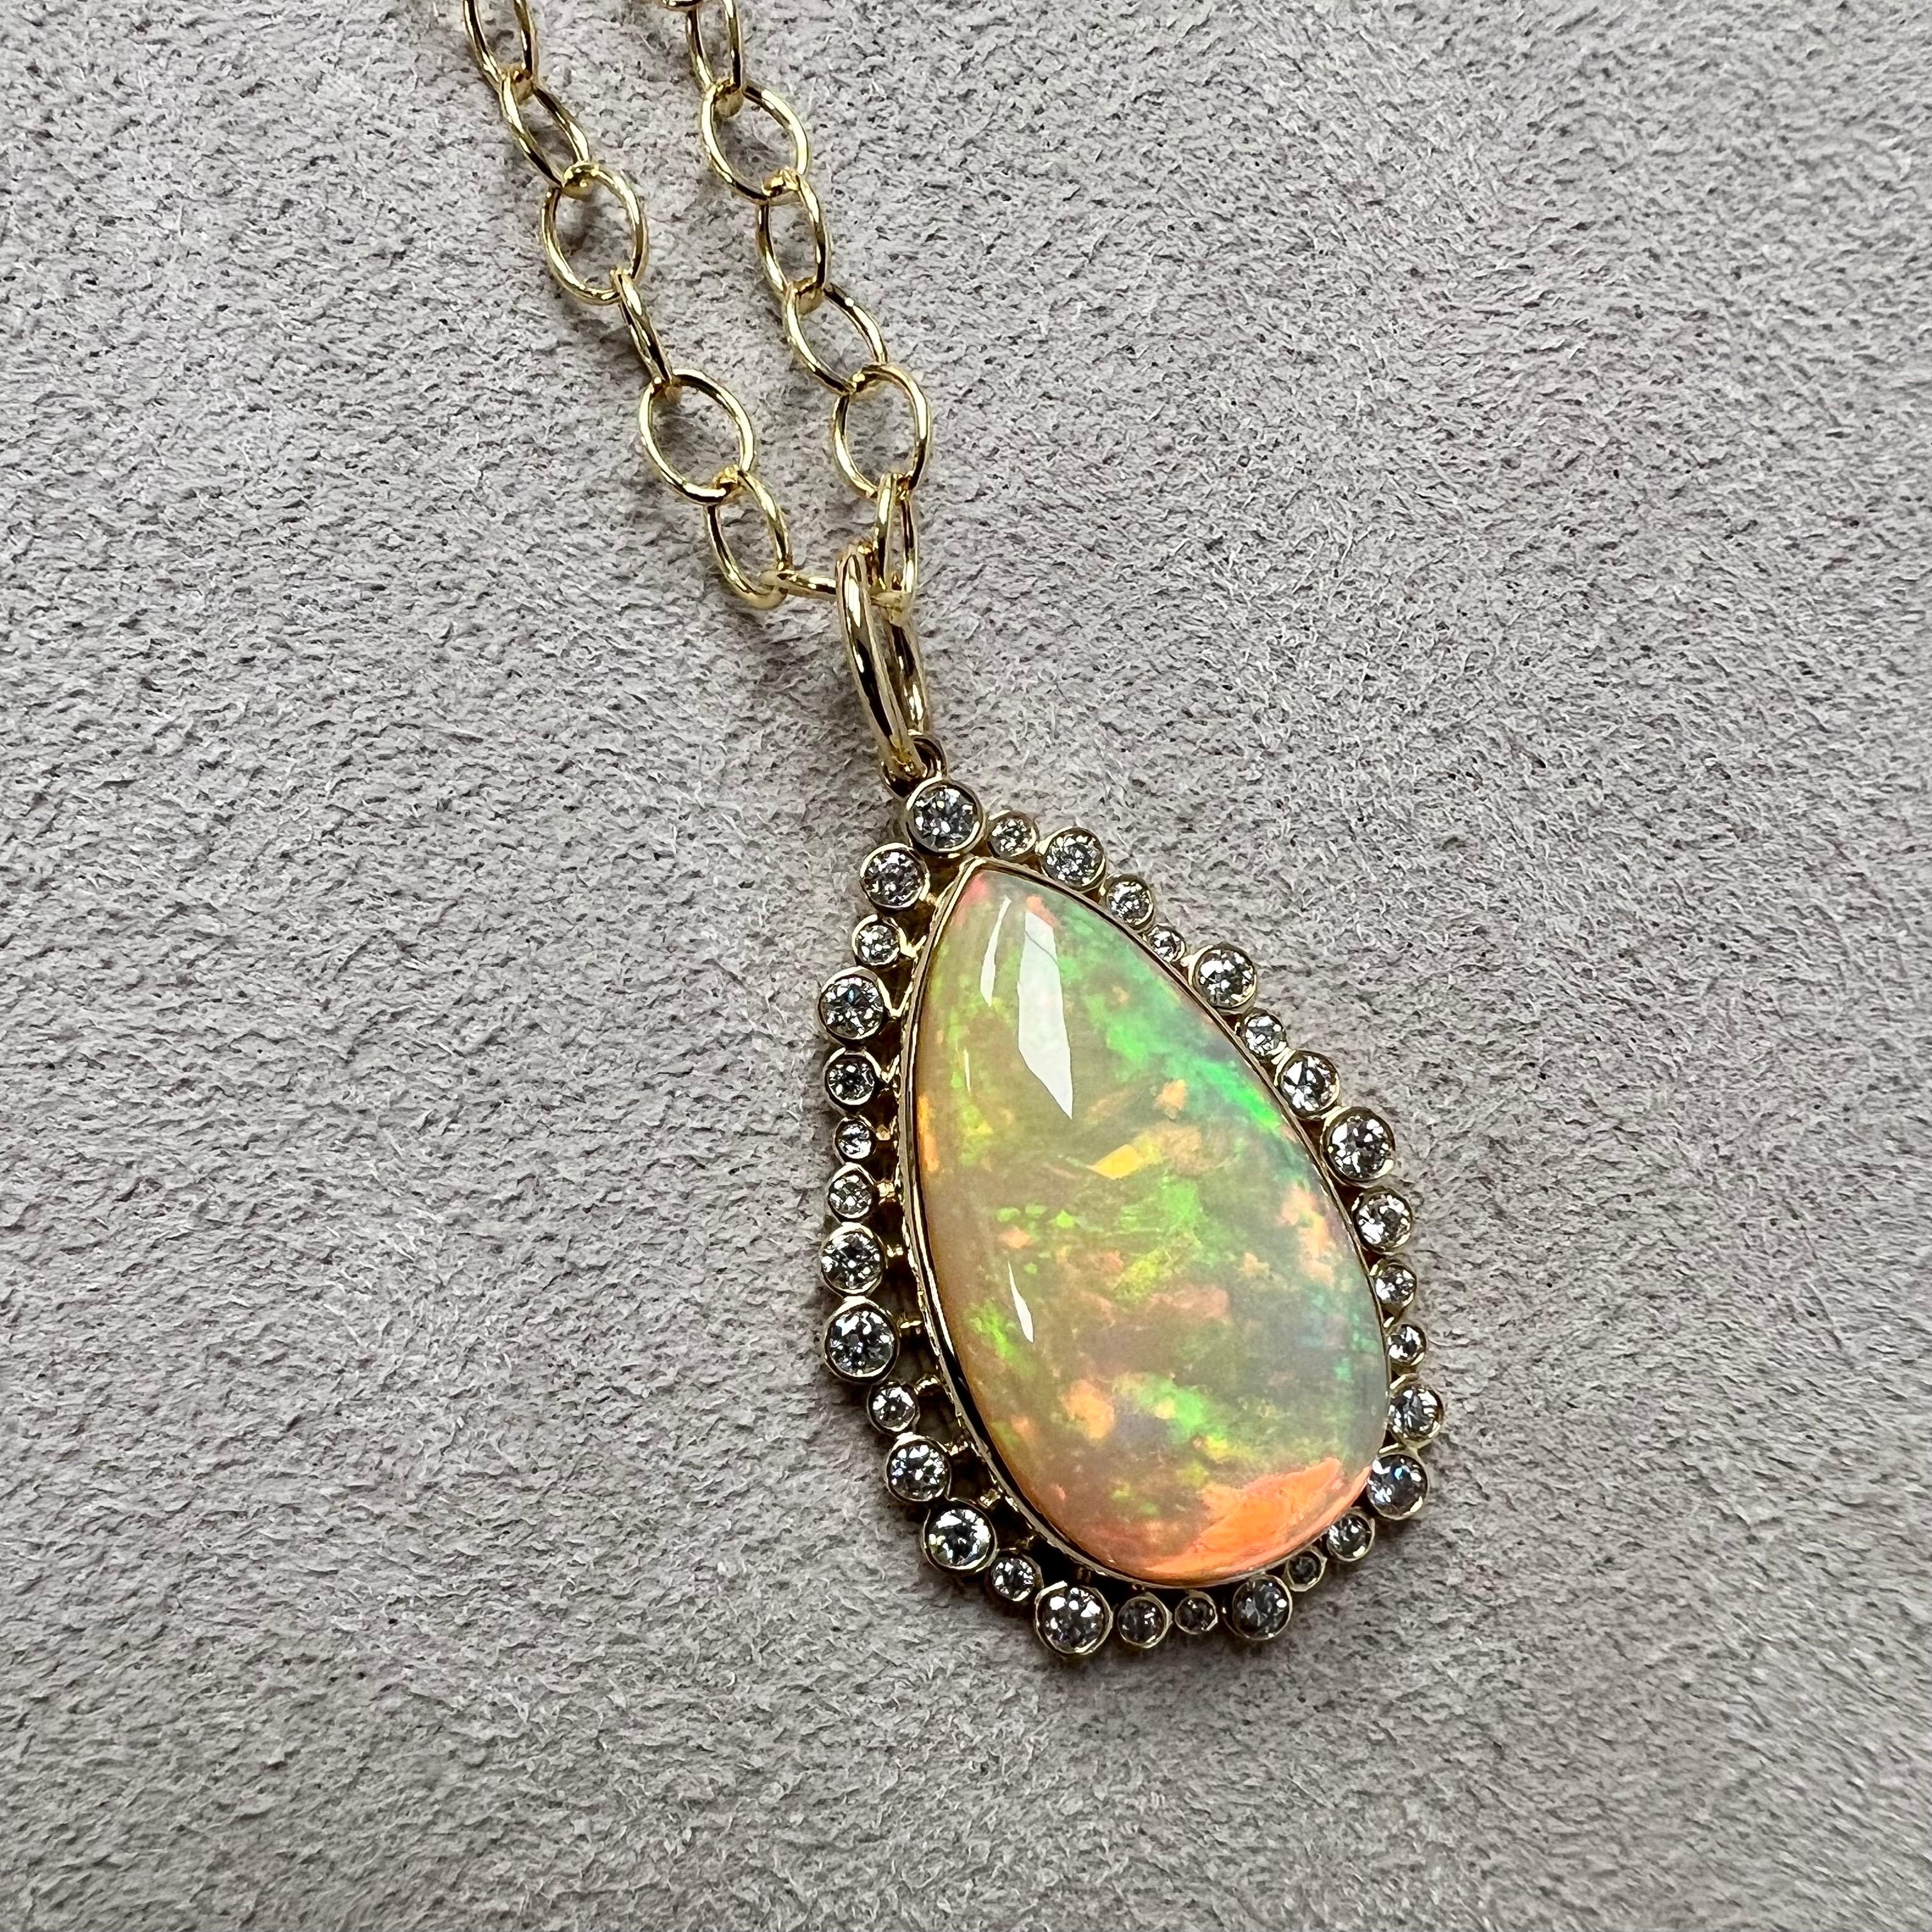 Created in 18 karat yellow gold
Ethiopian opal 8.50 carats approx.
Diamonds 0.50 carat approx.
Chain sold separately

Crafted with 18 karat yellow gold, this Pendant features 8.50 carats of Ethiopian opal and 0.50 carats of diamonds. Please note